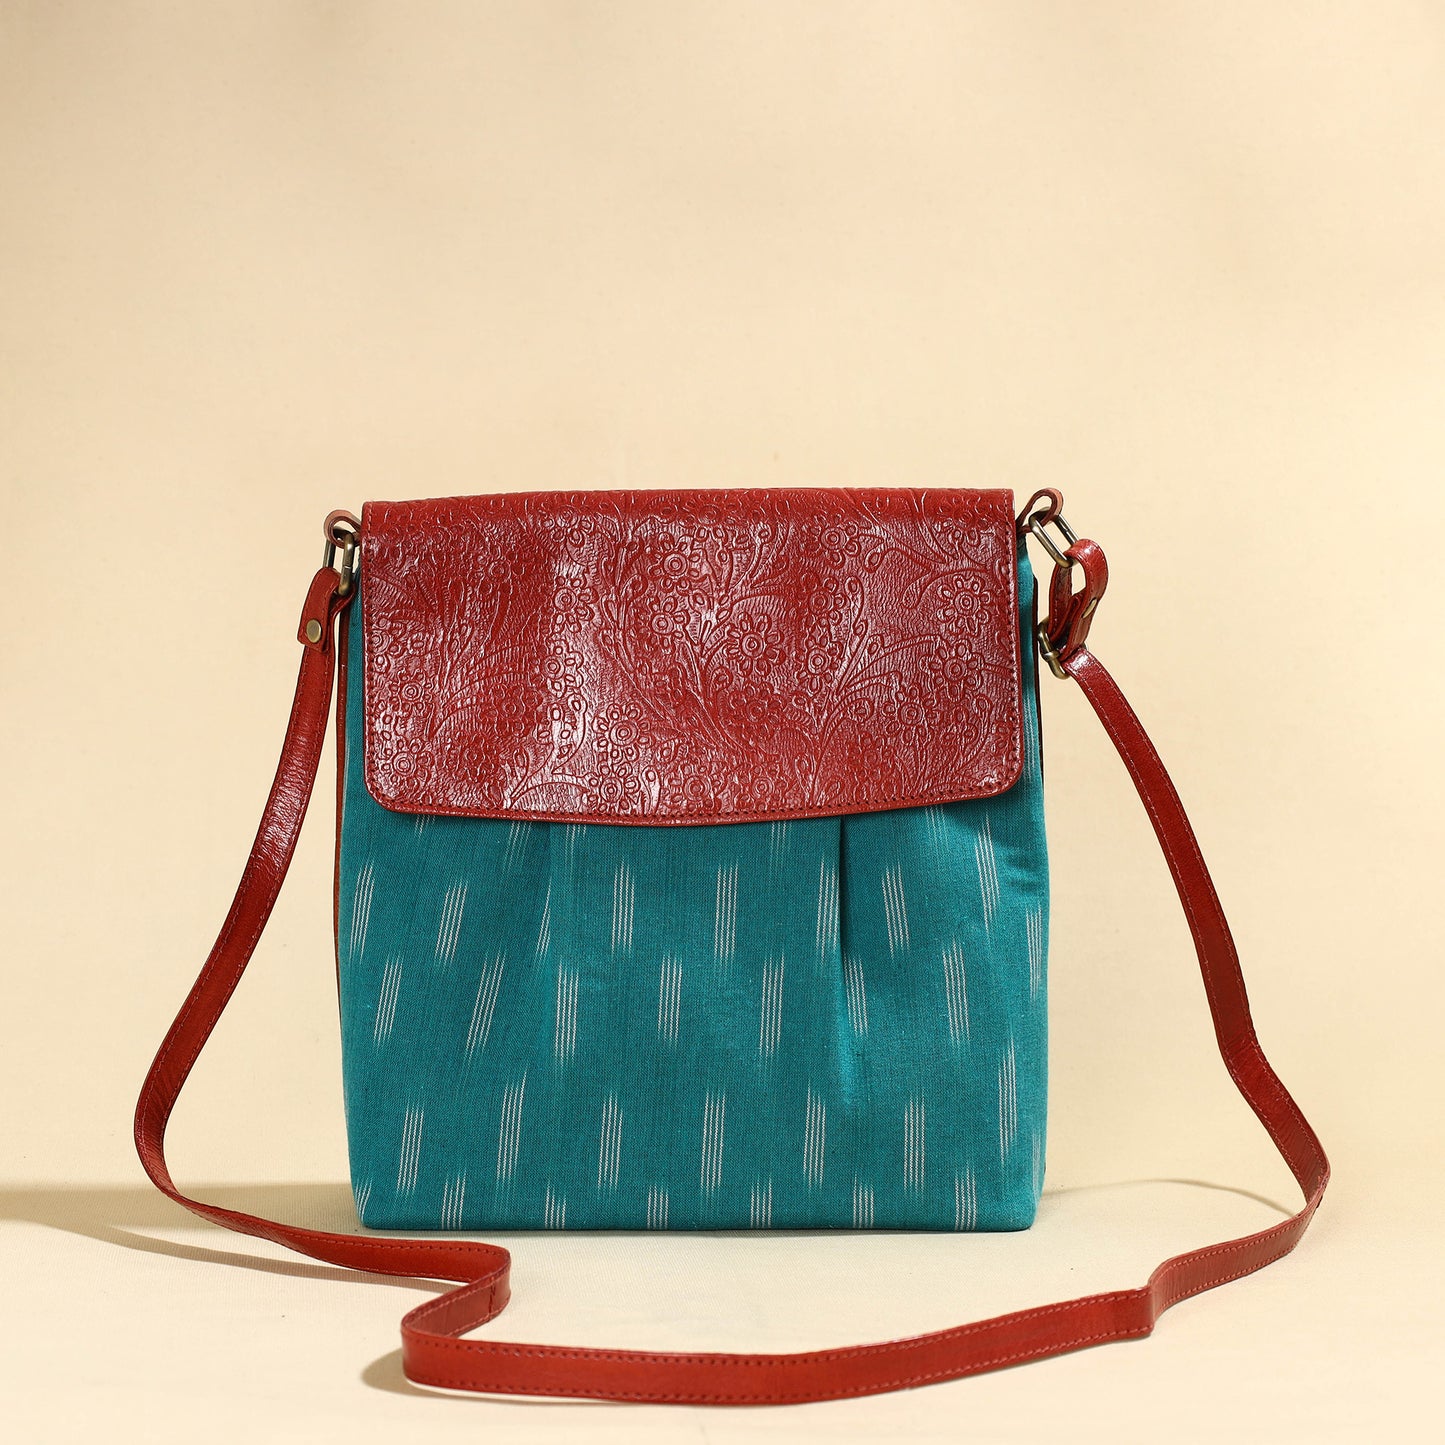 Blue - Handcrafted Ikat Fabric Sling Bag with Embossed Leather Flap